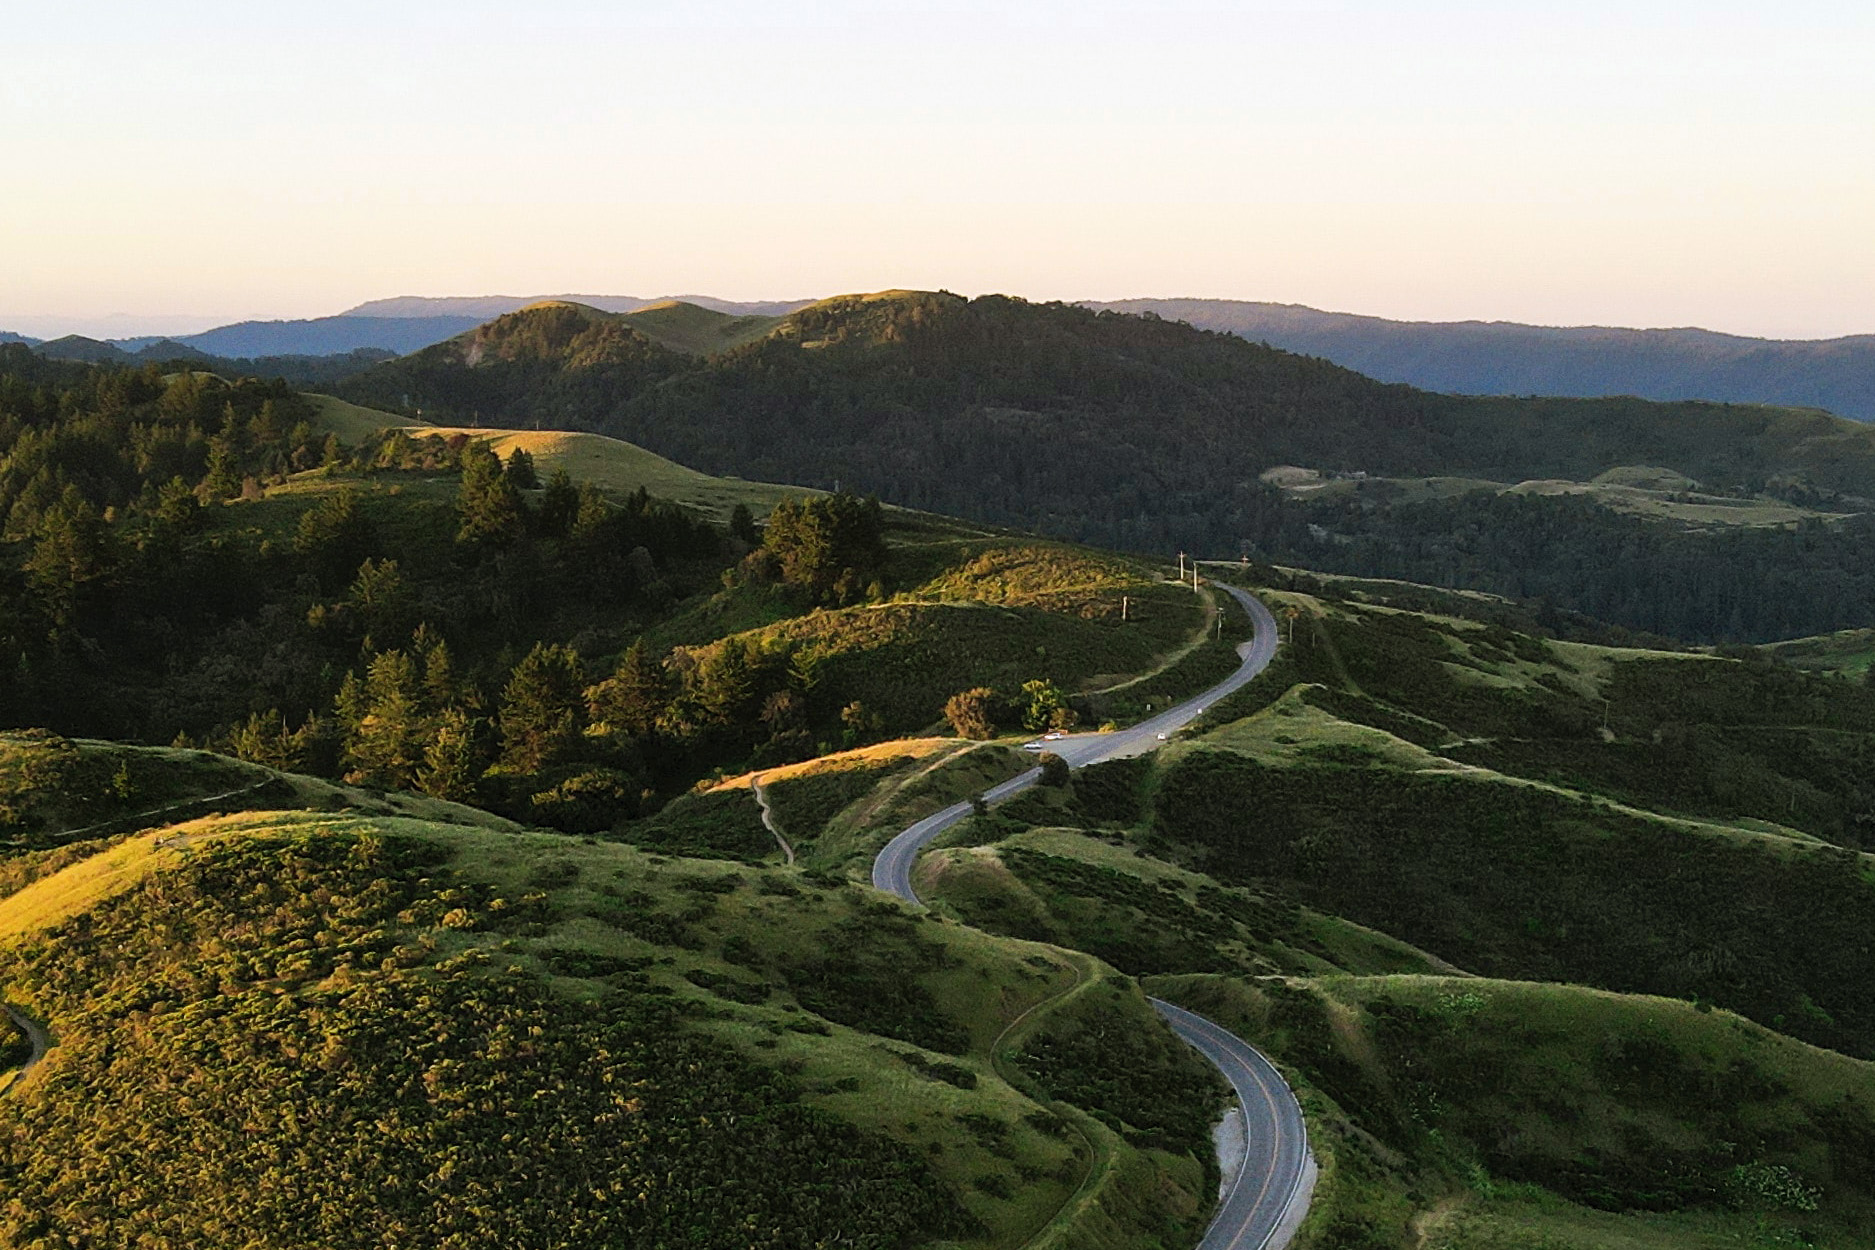 Arial image of Portola Valley at sunset. Rolling hills with one road winding through it.